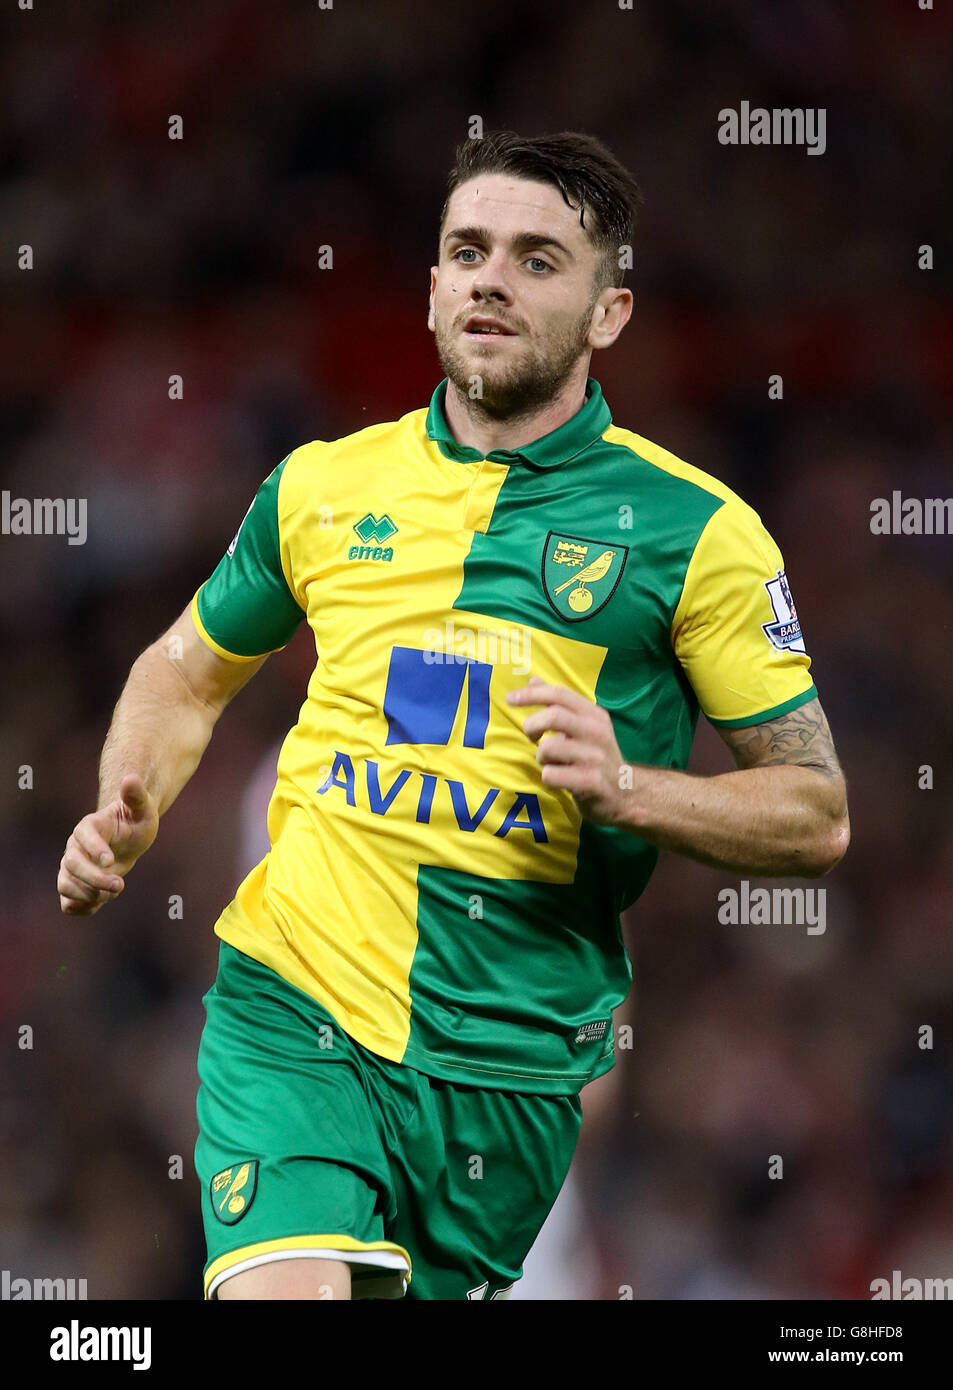 Manchester United / Norwich City - Barclays Premier League - Old Trafford.Robbie Brady, Norwich City Banque D'Images